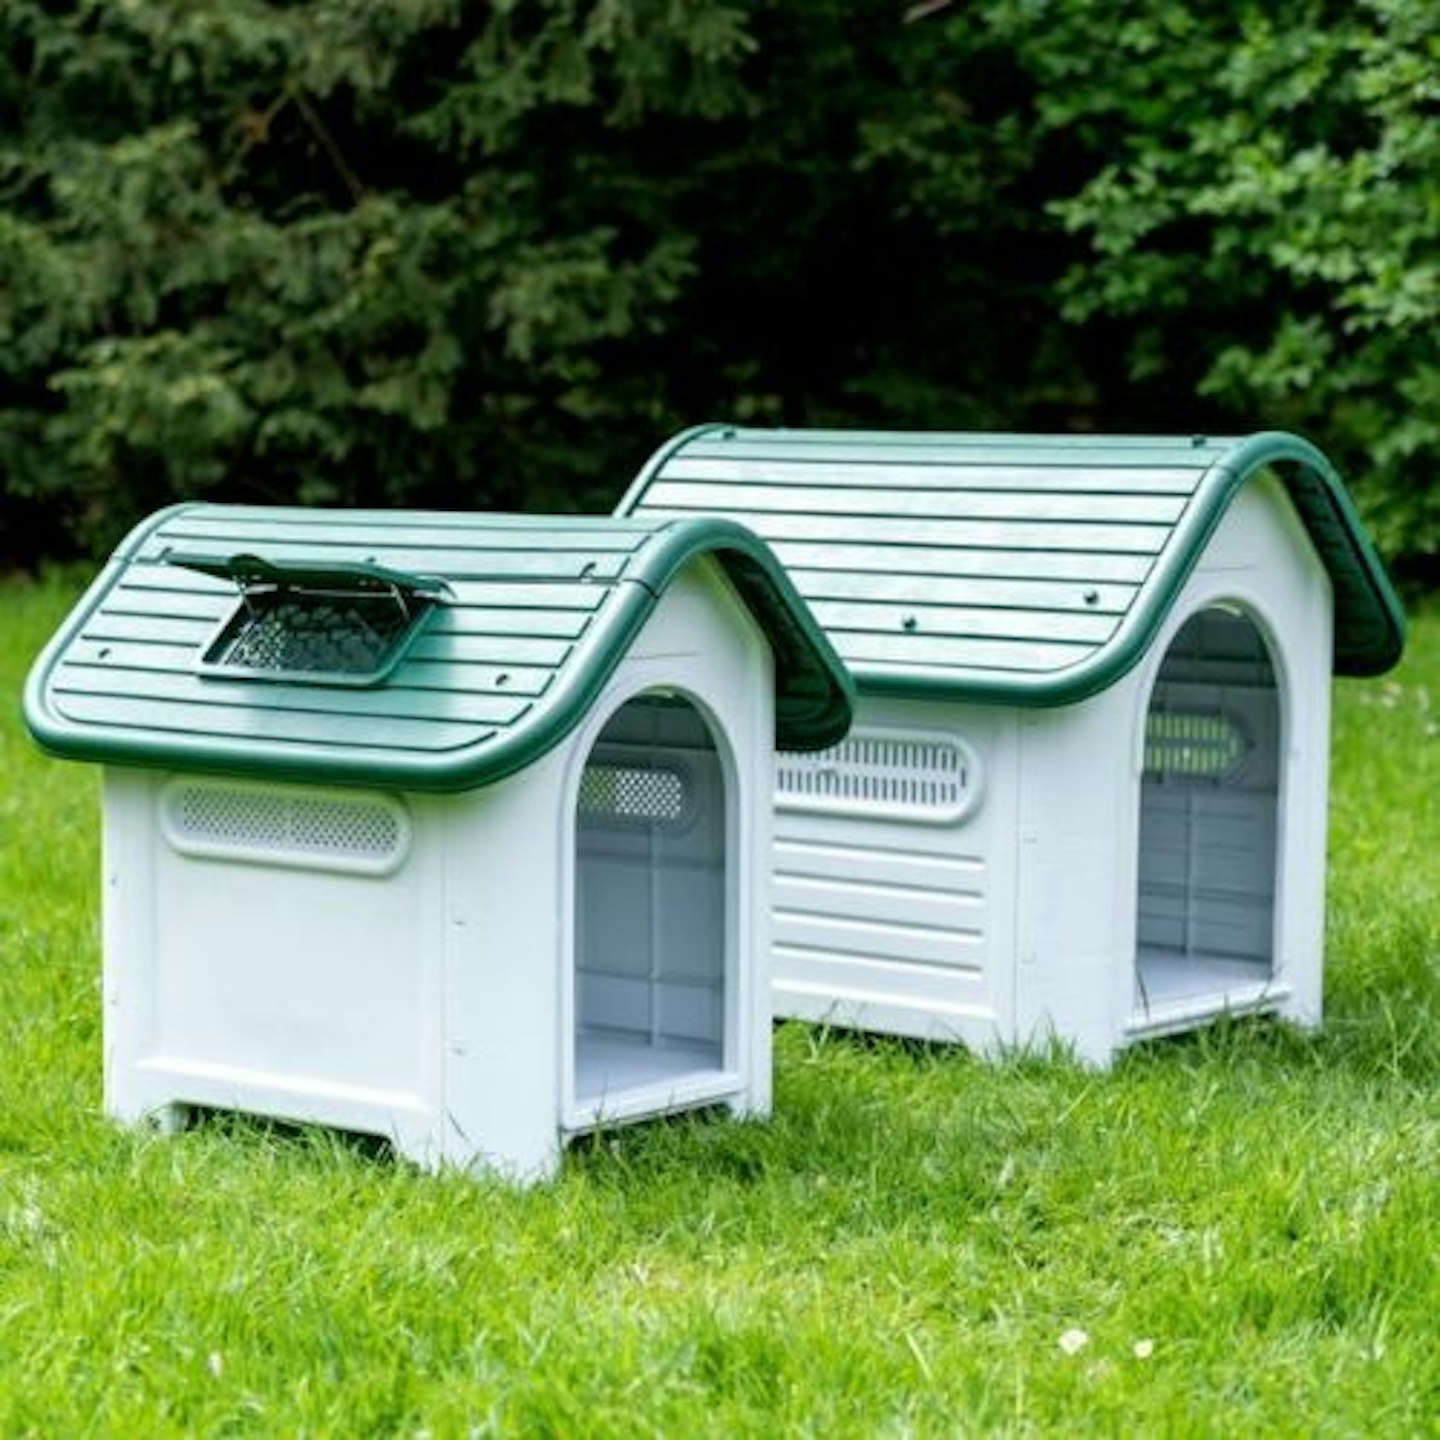 Plastic Dog Kennel - Great For Dogs With Allergies